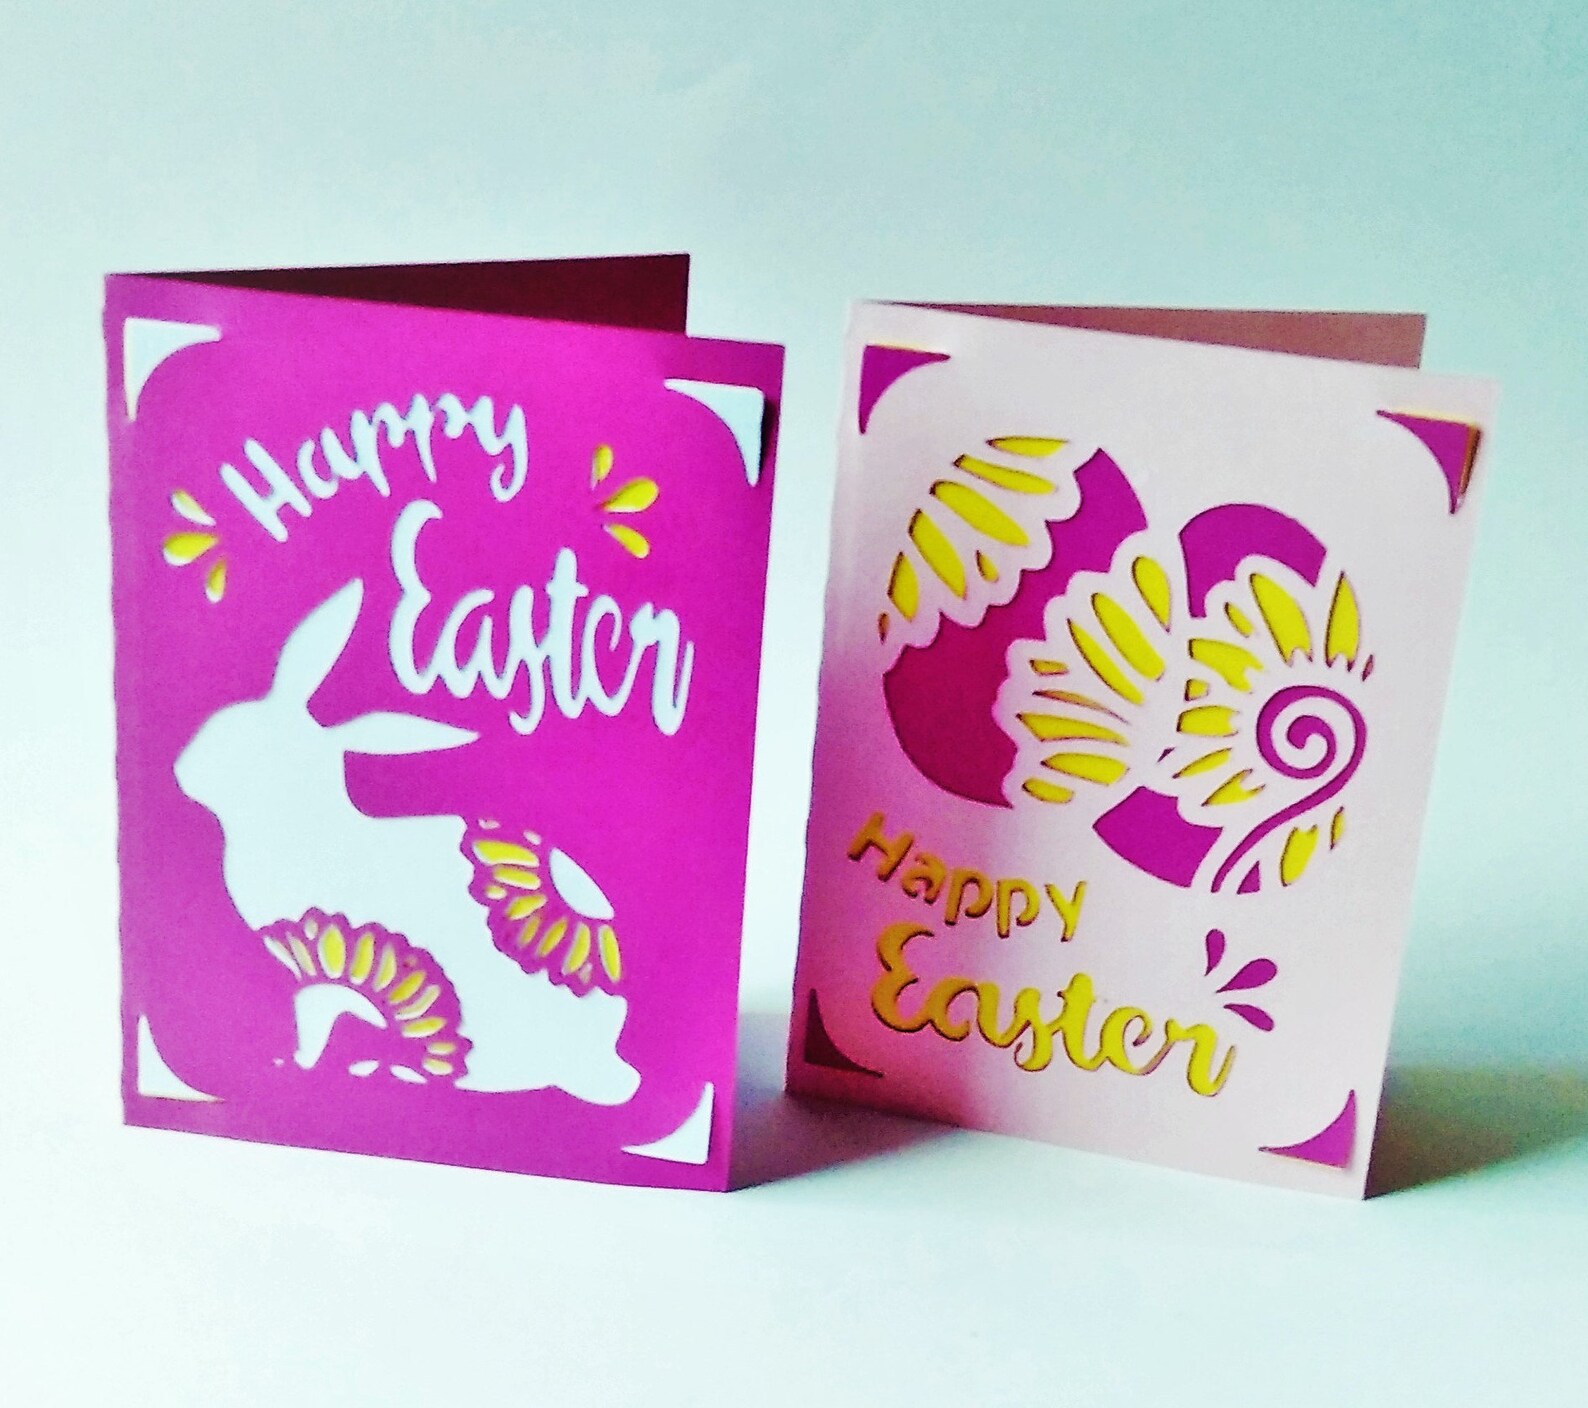 HAPPY EASTER CARDS. 2 Svg Templates. Layered Cards with Rabbit | Etsy